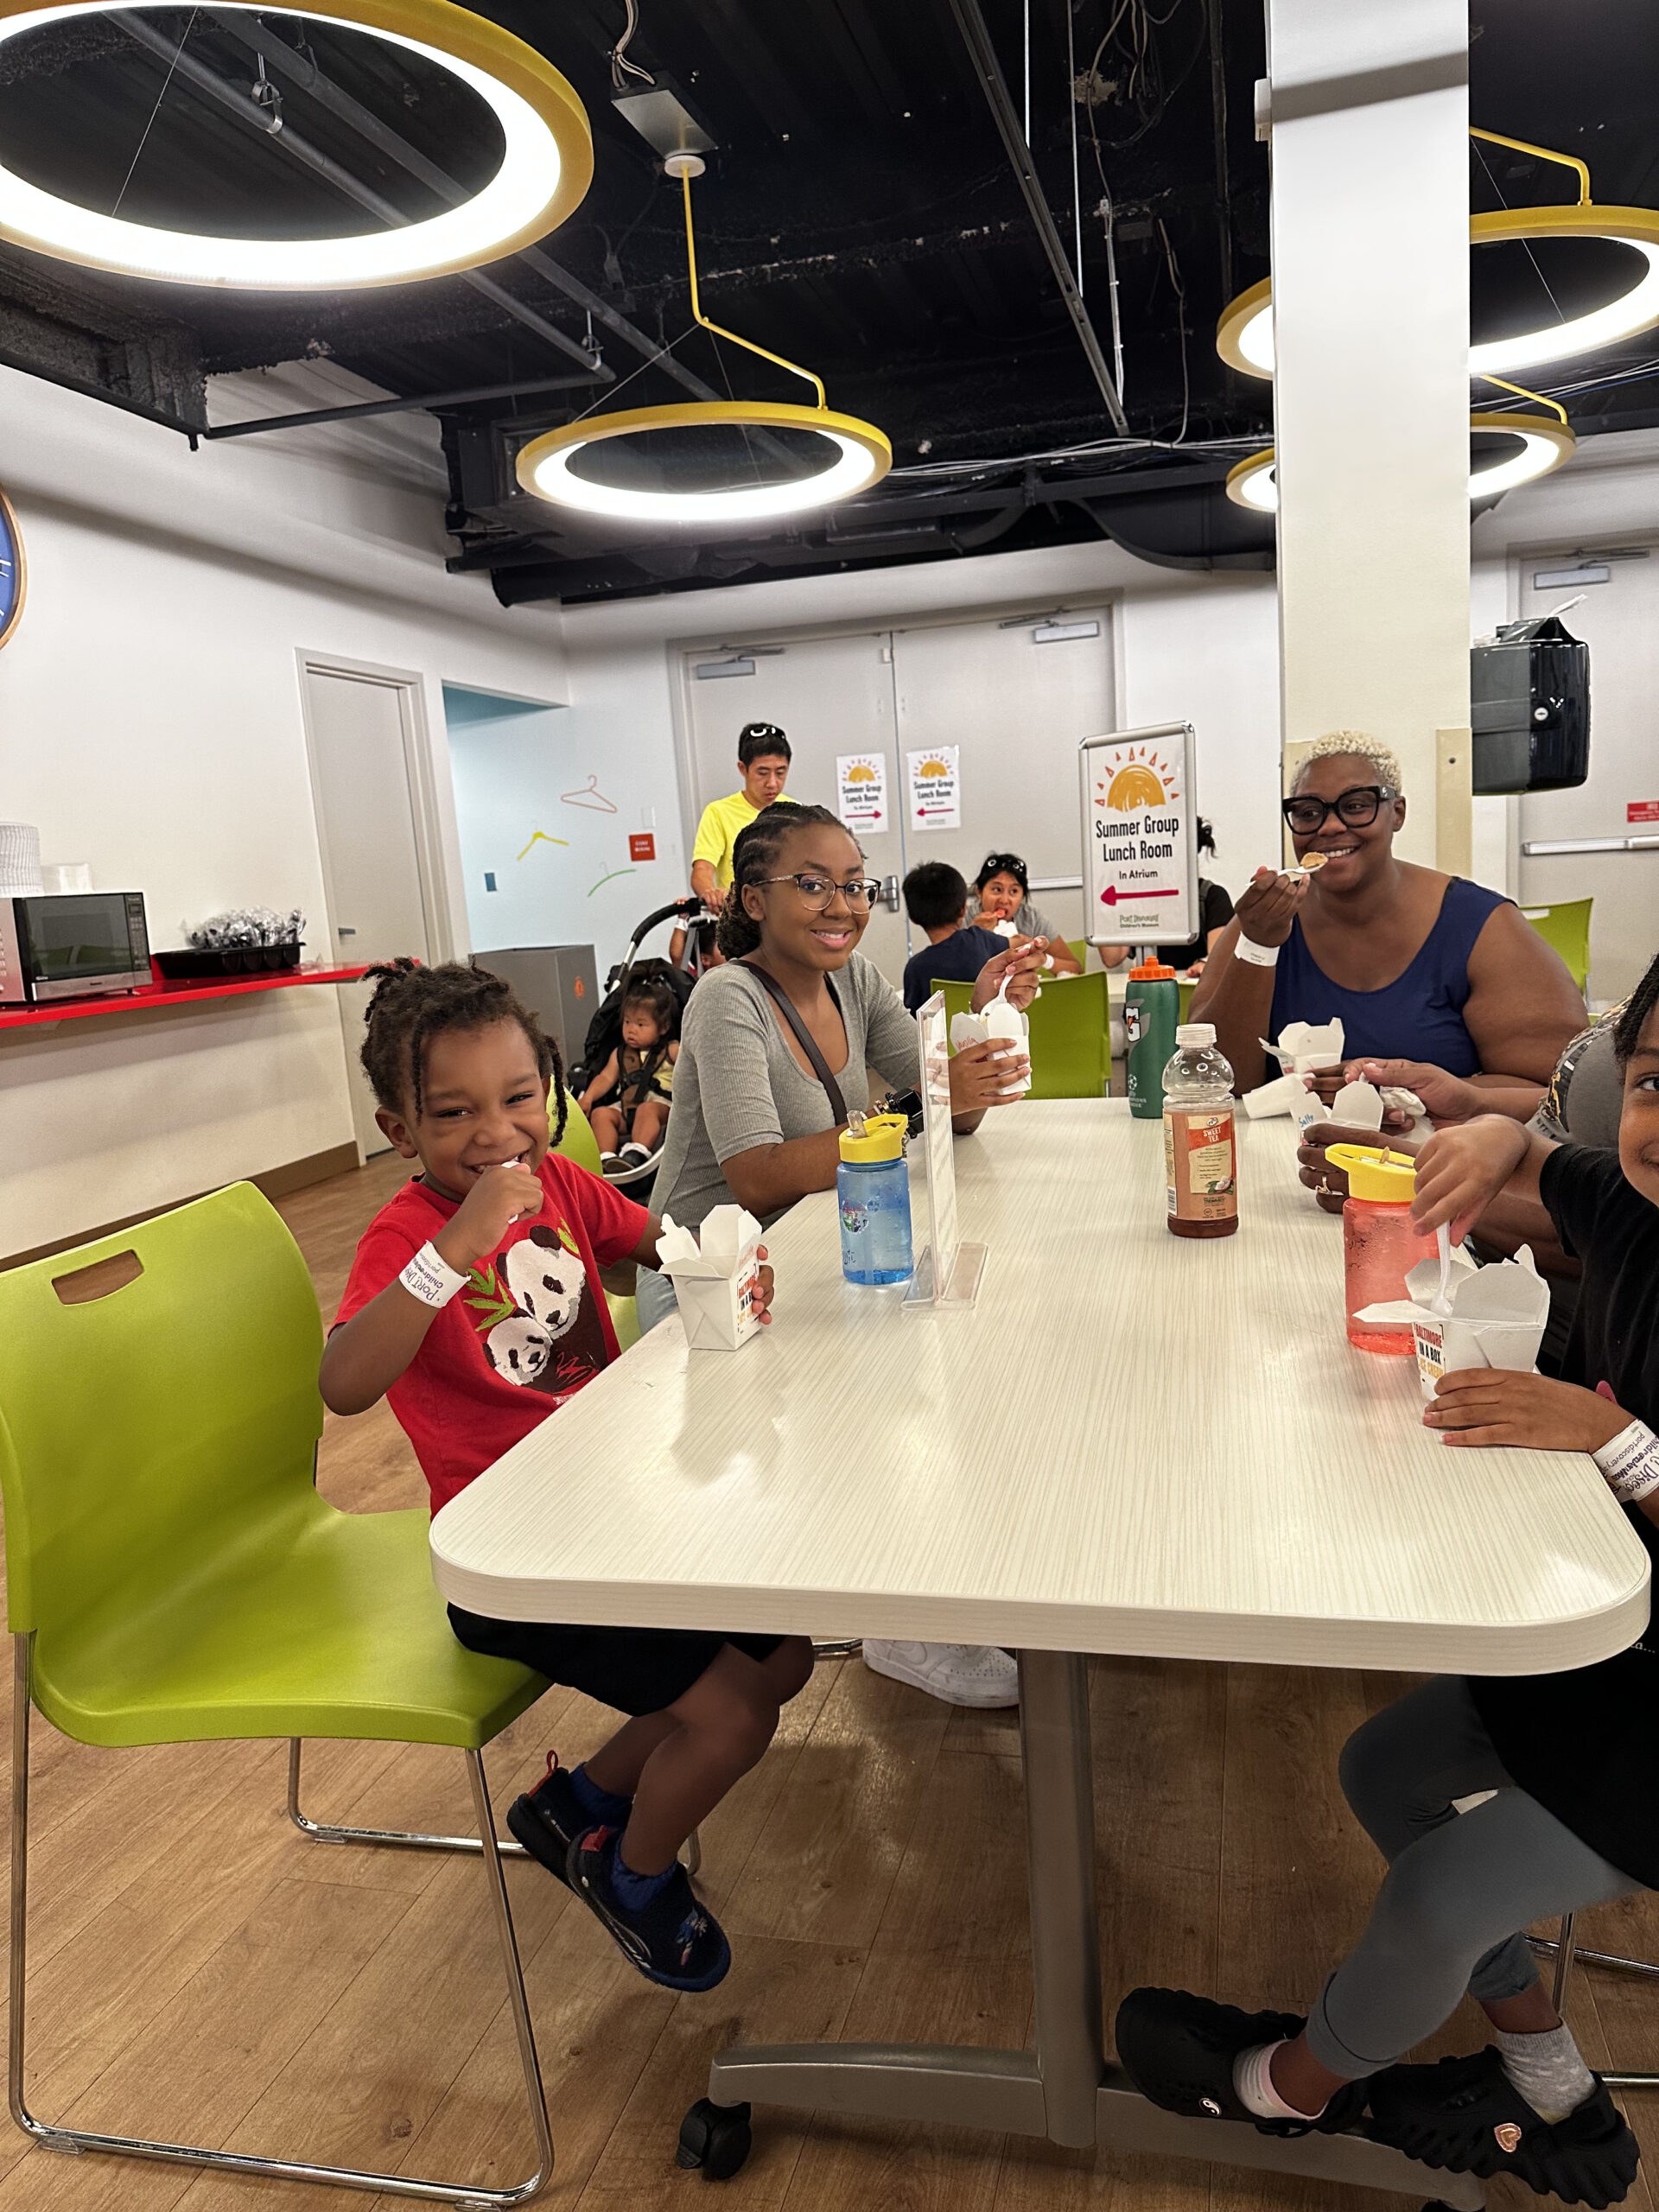 group of adults and children eating ice cream